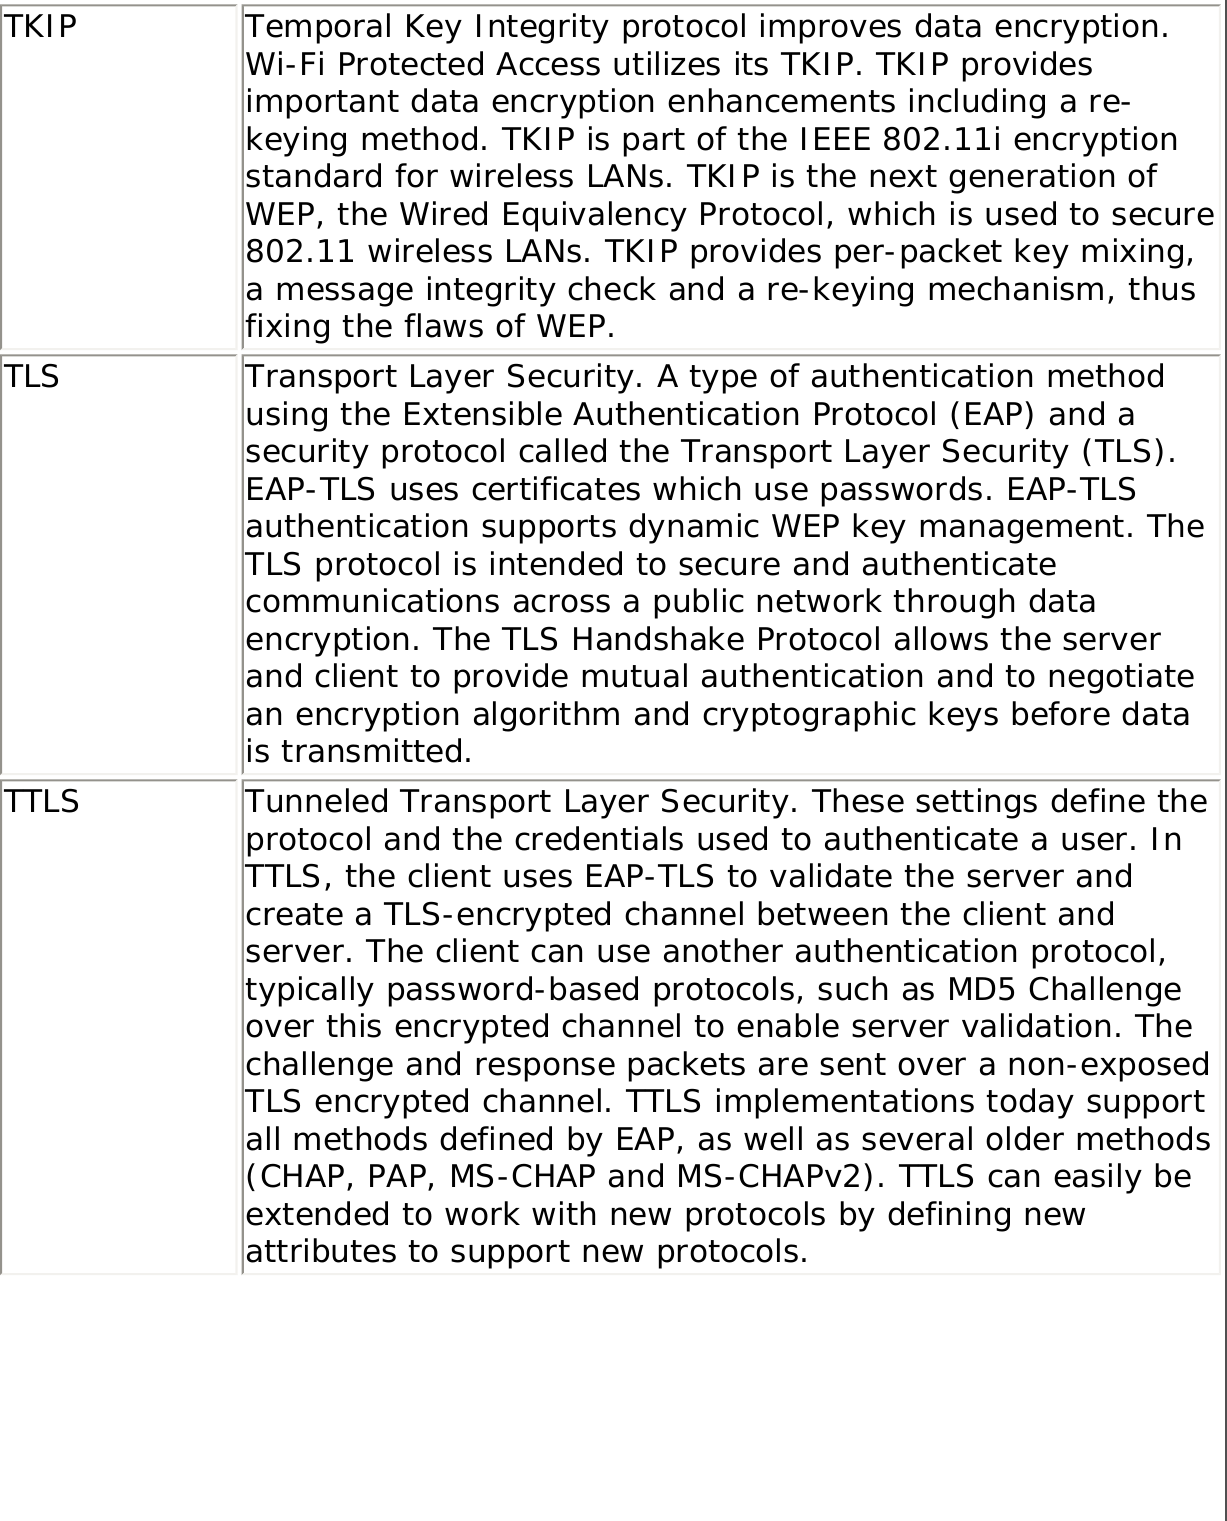 TKIP Temporal Key Integrity protocol improves data encryption. Wi-Fi Protected Access utilizes its TKIP. TKIP provides important data encryption enhancements including a re-keying method. TKIP is part of the IEEE 802.11i encryption standard for wireless LANs. TKIP is the next generation of WEP, the Wired Equivalency Protocol, which is used to secure 802.11 wireless LANs. TKIP provides per-packet key mixing, a message integrity check and a re-keying mechanism, thus fixing the flaws of WEP.TLS Transport Layer Security. A type of authentication method using the Extensible Authentication Protocol (EAP) and a security protocol called the Transport Layer Security (TLS). EAP-TLS uses certificates which use passwords. EAP-TLS authentication supports dynamic WEP key management. The TLS protocol is intended to secure and authenticate communications across a public network through data encryption. The TLS Handshake Protocol allows the server and client to provide mutual authentication and to negotiate an encryption algorithm and cryptographic keys before data is transmitted.TTLS Tunneled Transport Layer Security. These settings define the protocol and the credentials used to authenticate a user. In TTLS, the client uses EAP-TLS to validate the server and create a TLS-encrypted channel between the client and server. The client can use another authentication protocol, typically password-based protocols, such as MD5 Challenge over this encrypted channel to enable server validation. The challenge and response packets are sent over a non-exposed TLS encrypted channel. TTLS implementations today support all methods defined by EAP, as well as several older methods (CHAP, PAP, MS-CHAP and MS-CHAPv2). TTLS can easily be extended to work with new protocols by defining new attributes to support new protocols.